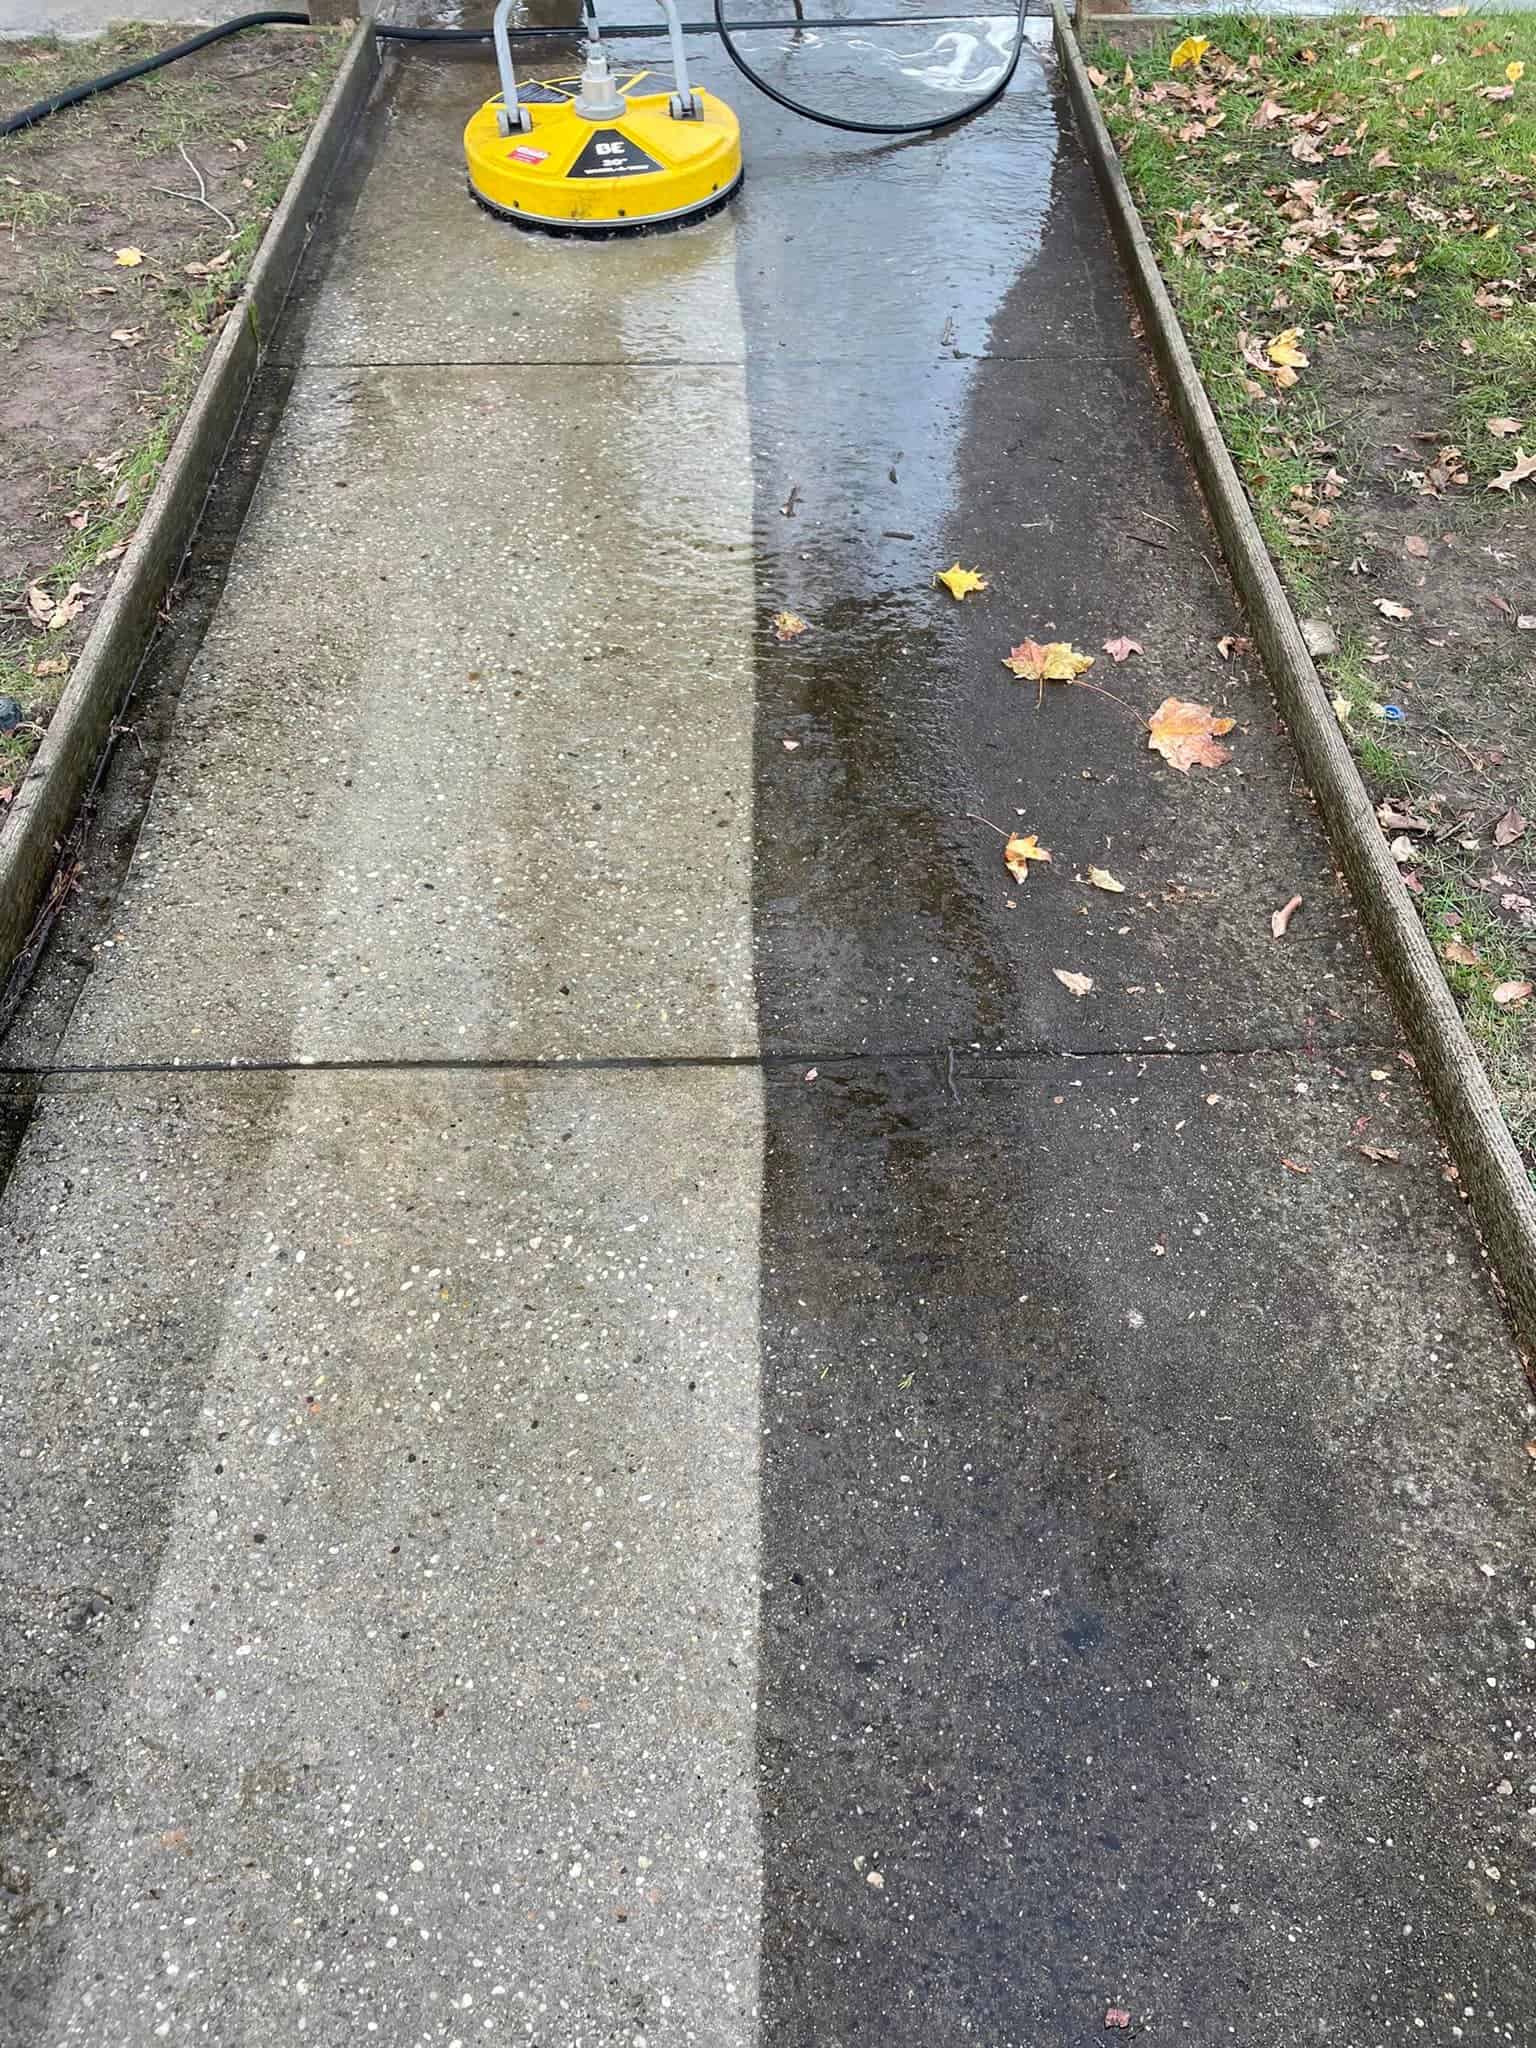 Power Washing Services Near Me in Centerport, NY